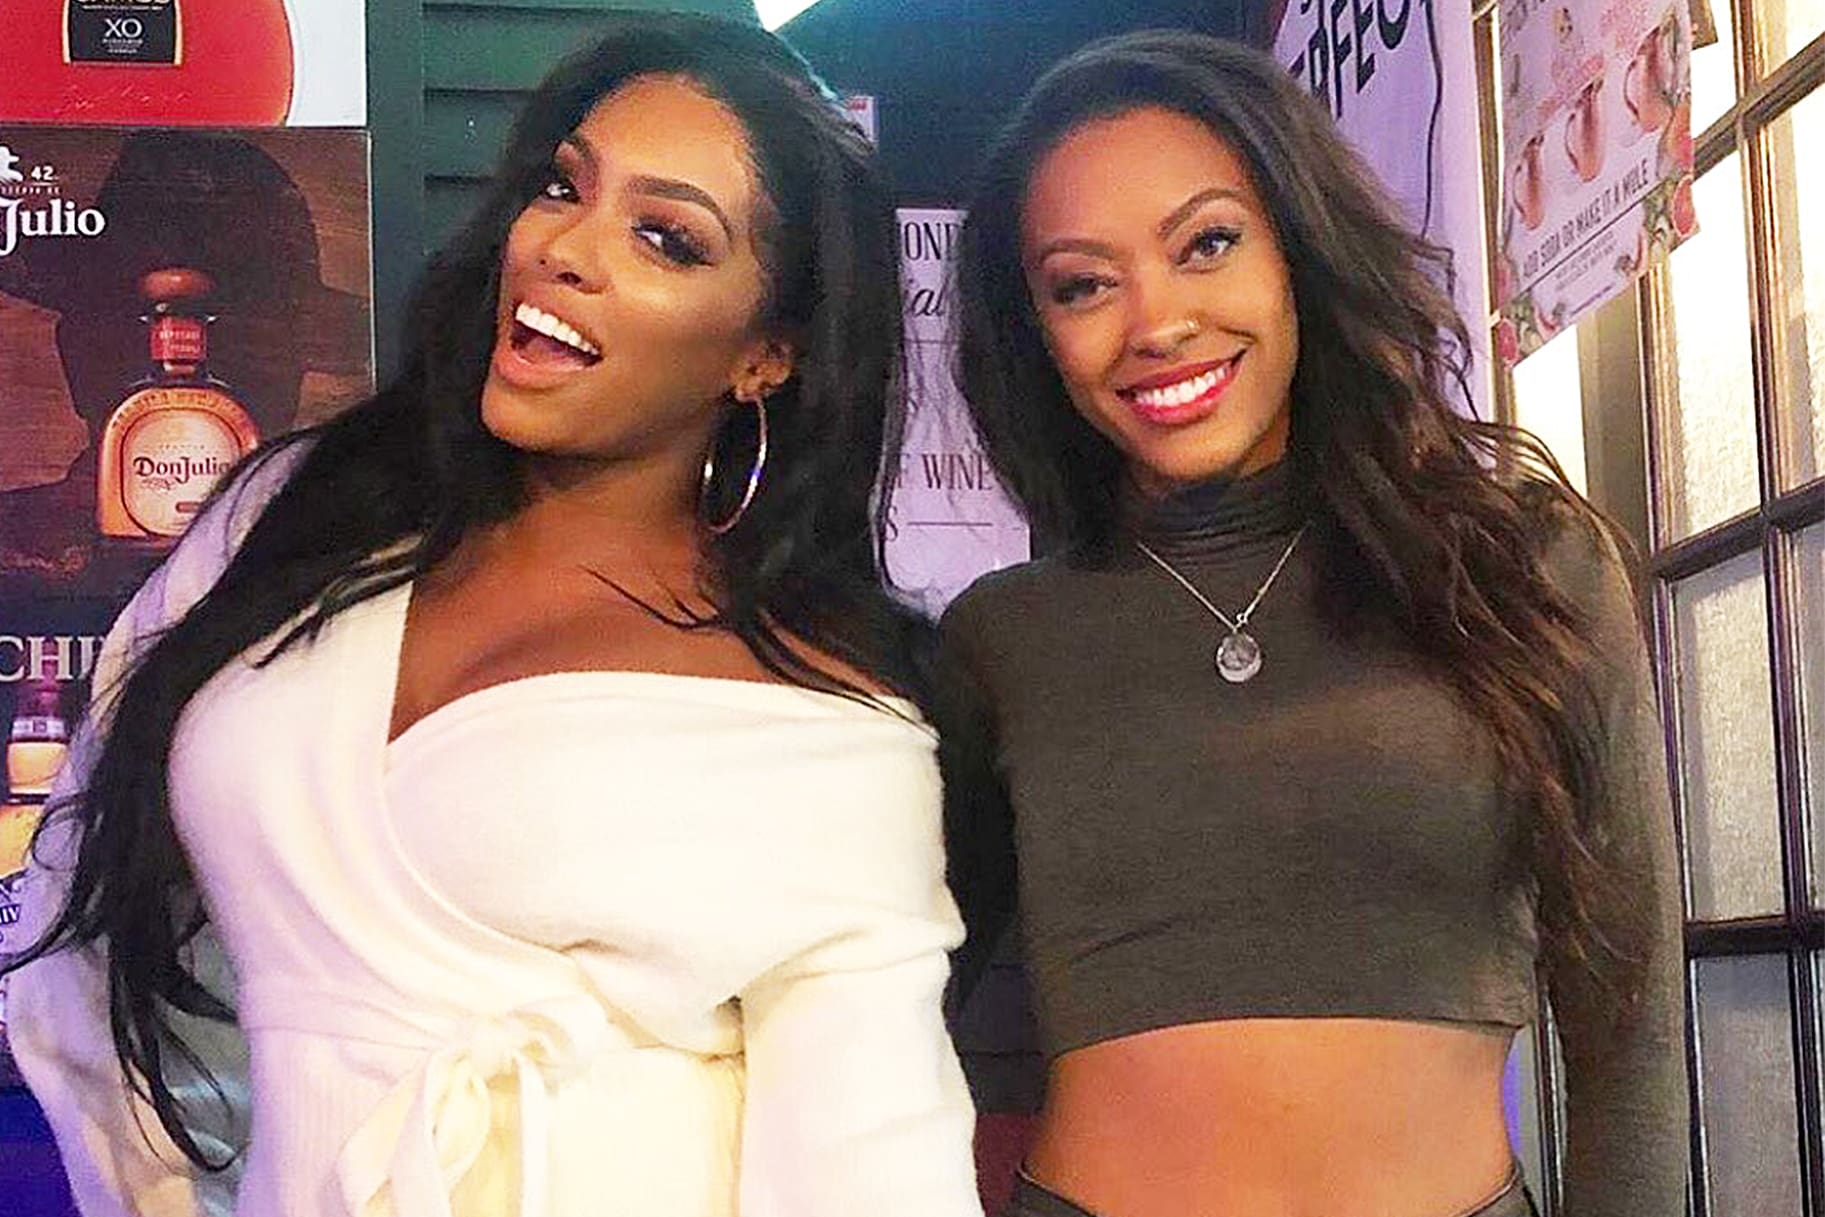 Porsha Williams Is Proud Of Her Sister, Lauren Williams For Becoming A Guest Panelist At An Important Event